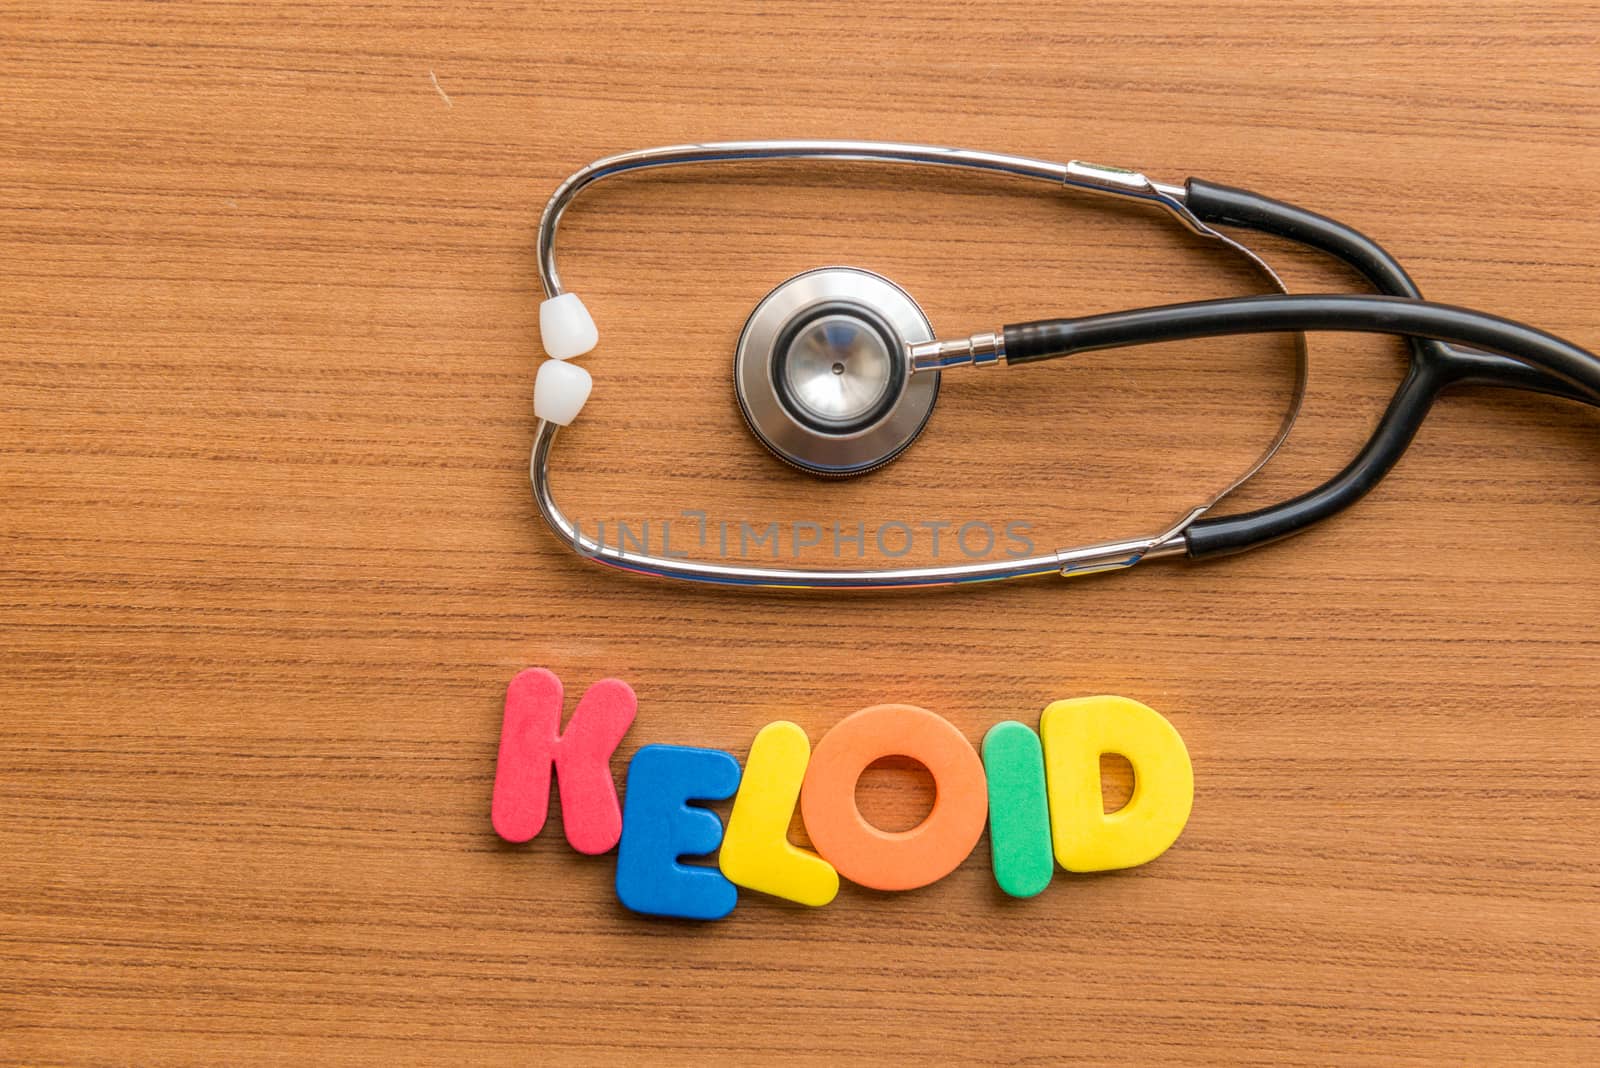 keloid colorful word with Stethoscope on wooden background